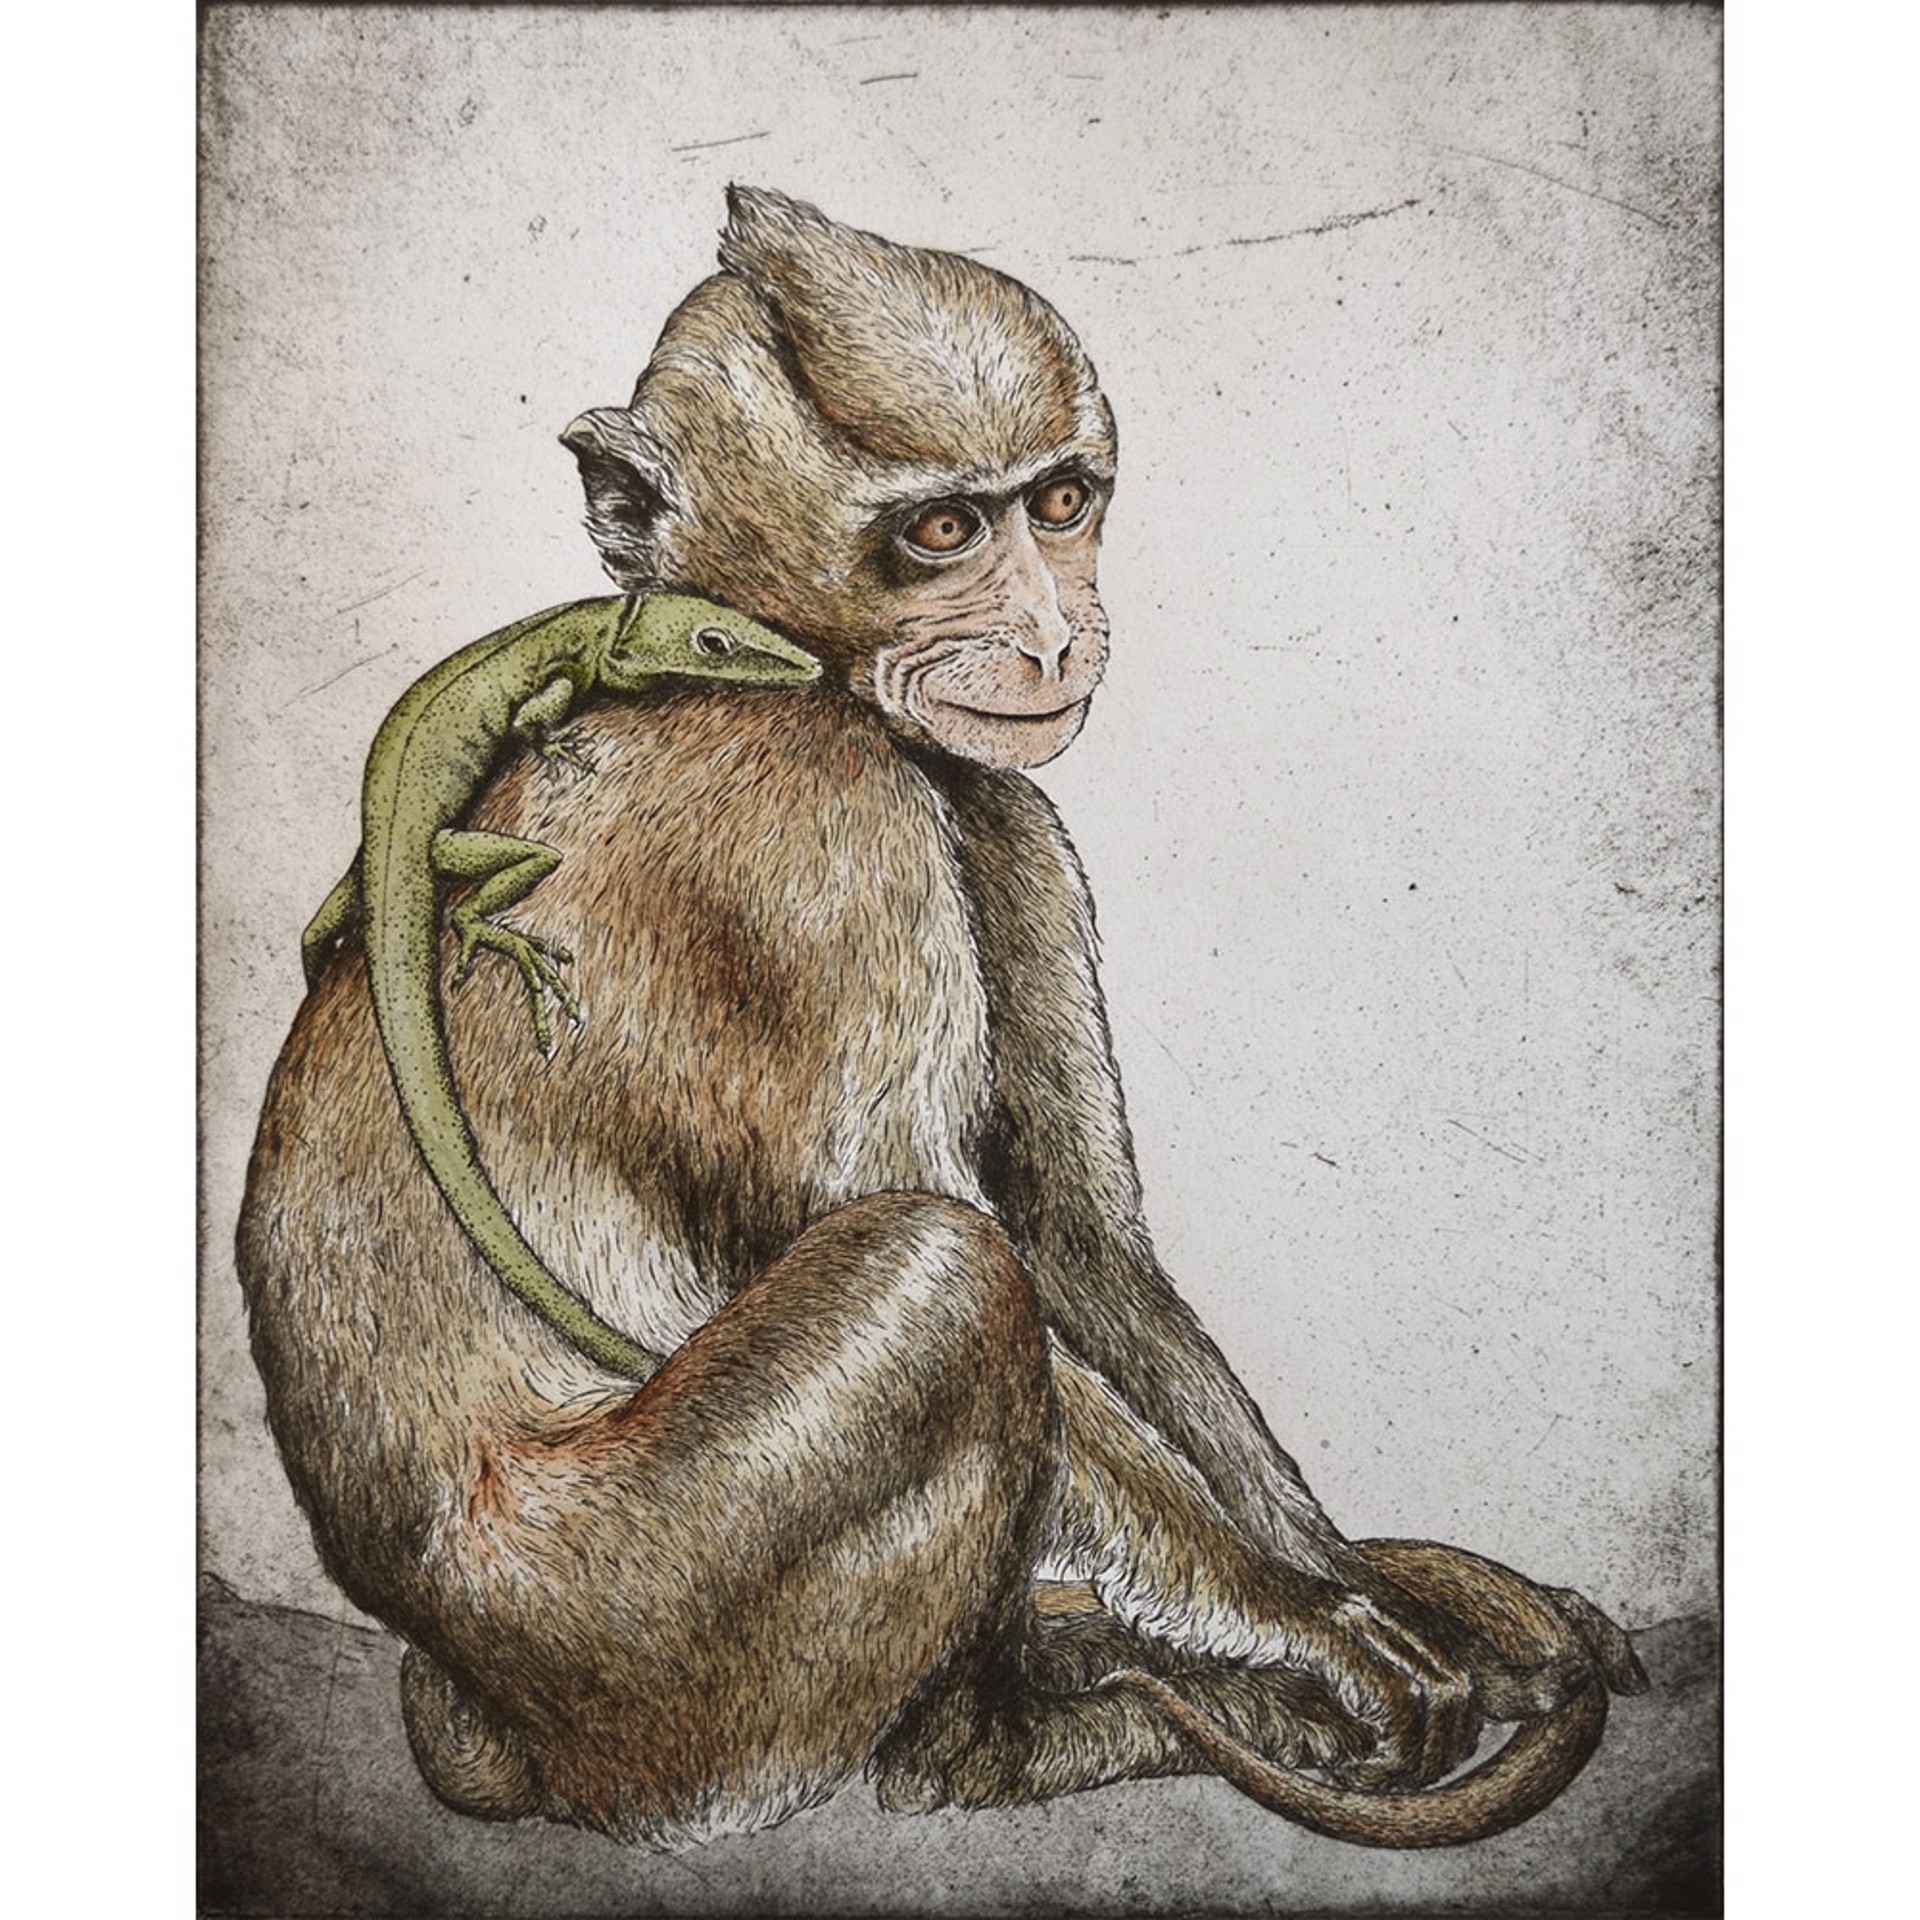 Macaque and Anole by Briony Morrow-Cribbs